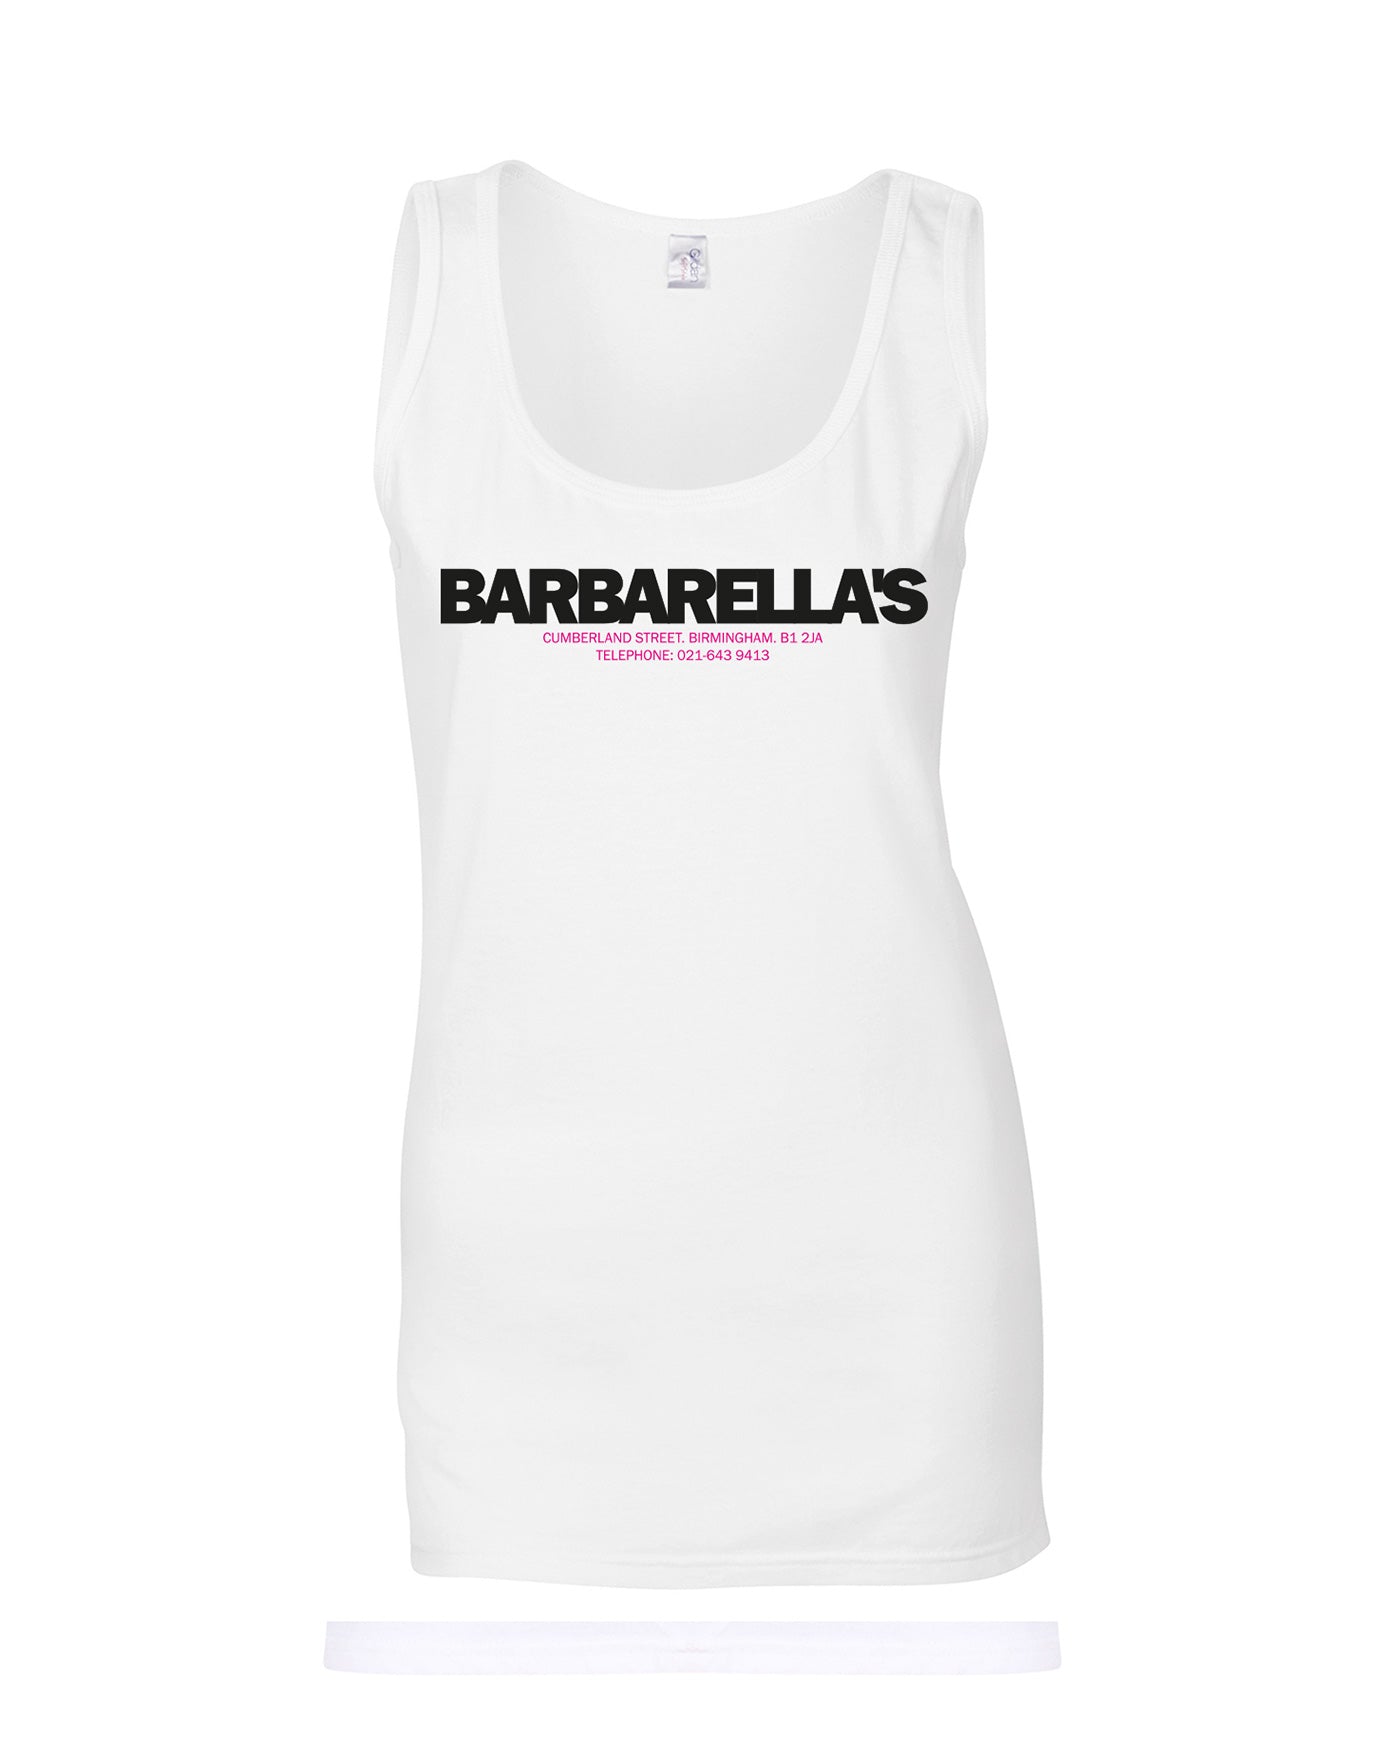 Barbarella's ladies fit vest - various colours - Dirty Stop Outs